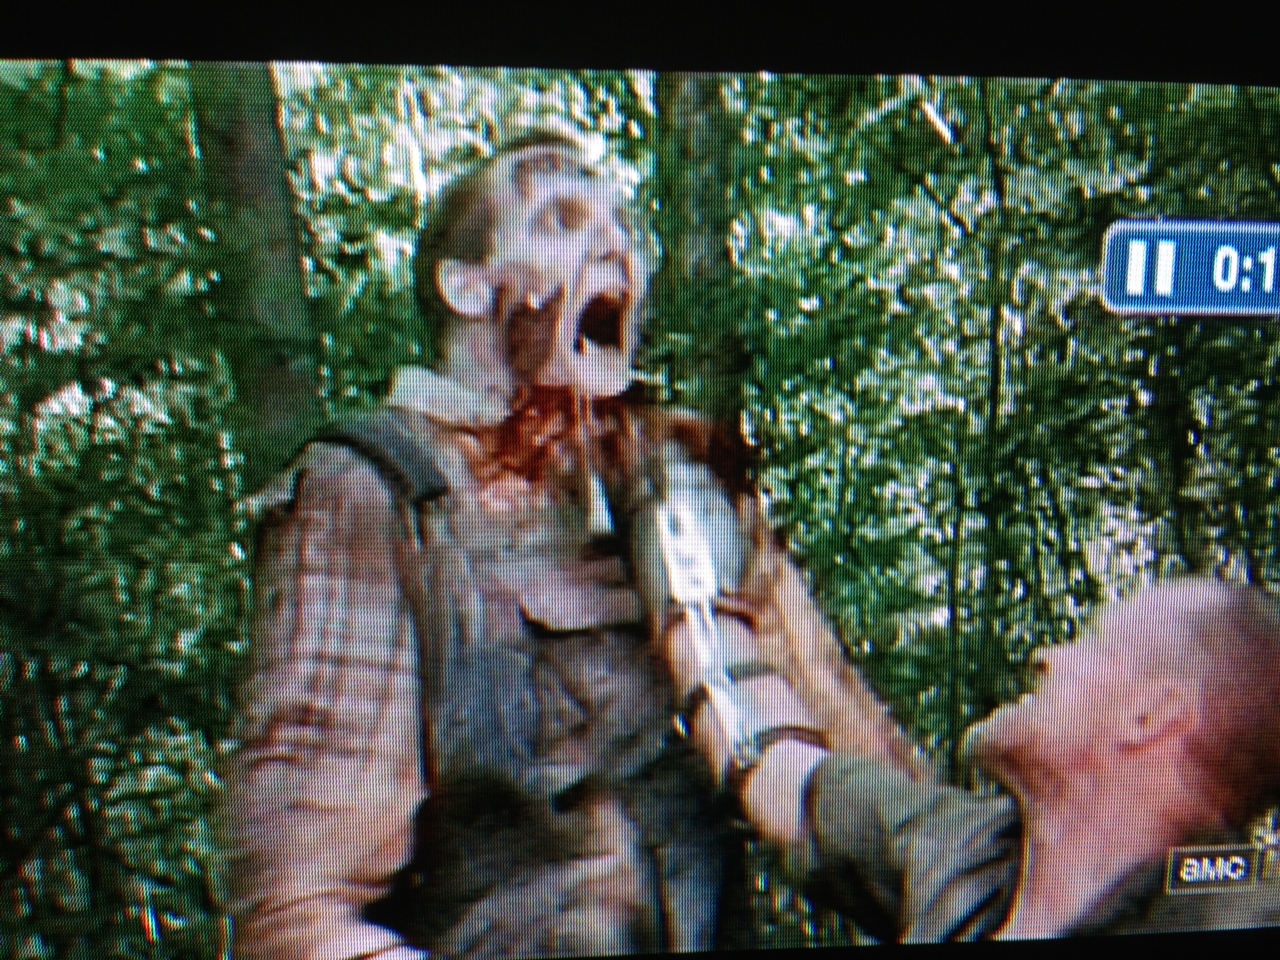 Frame capture of getting killed by Michael Rooker as 